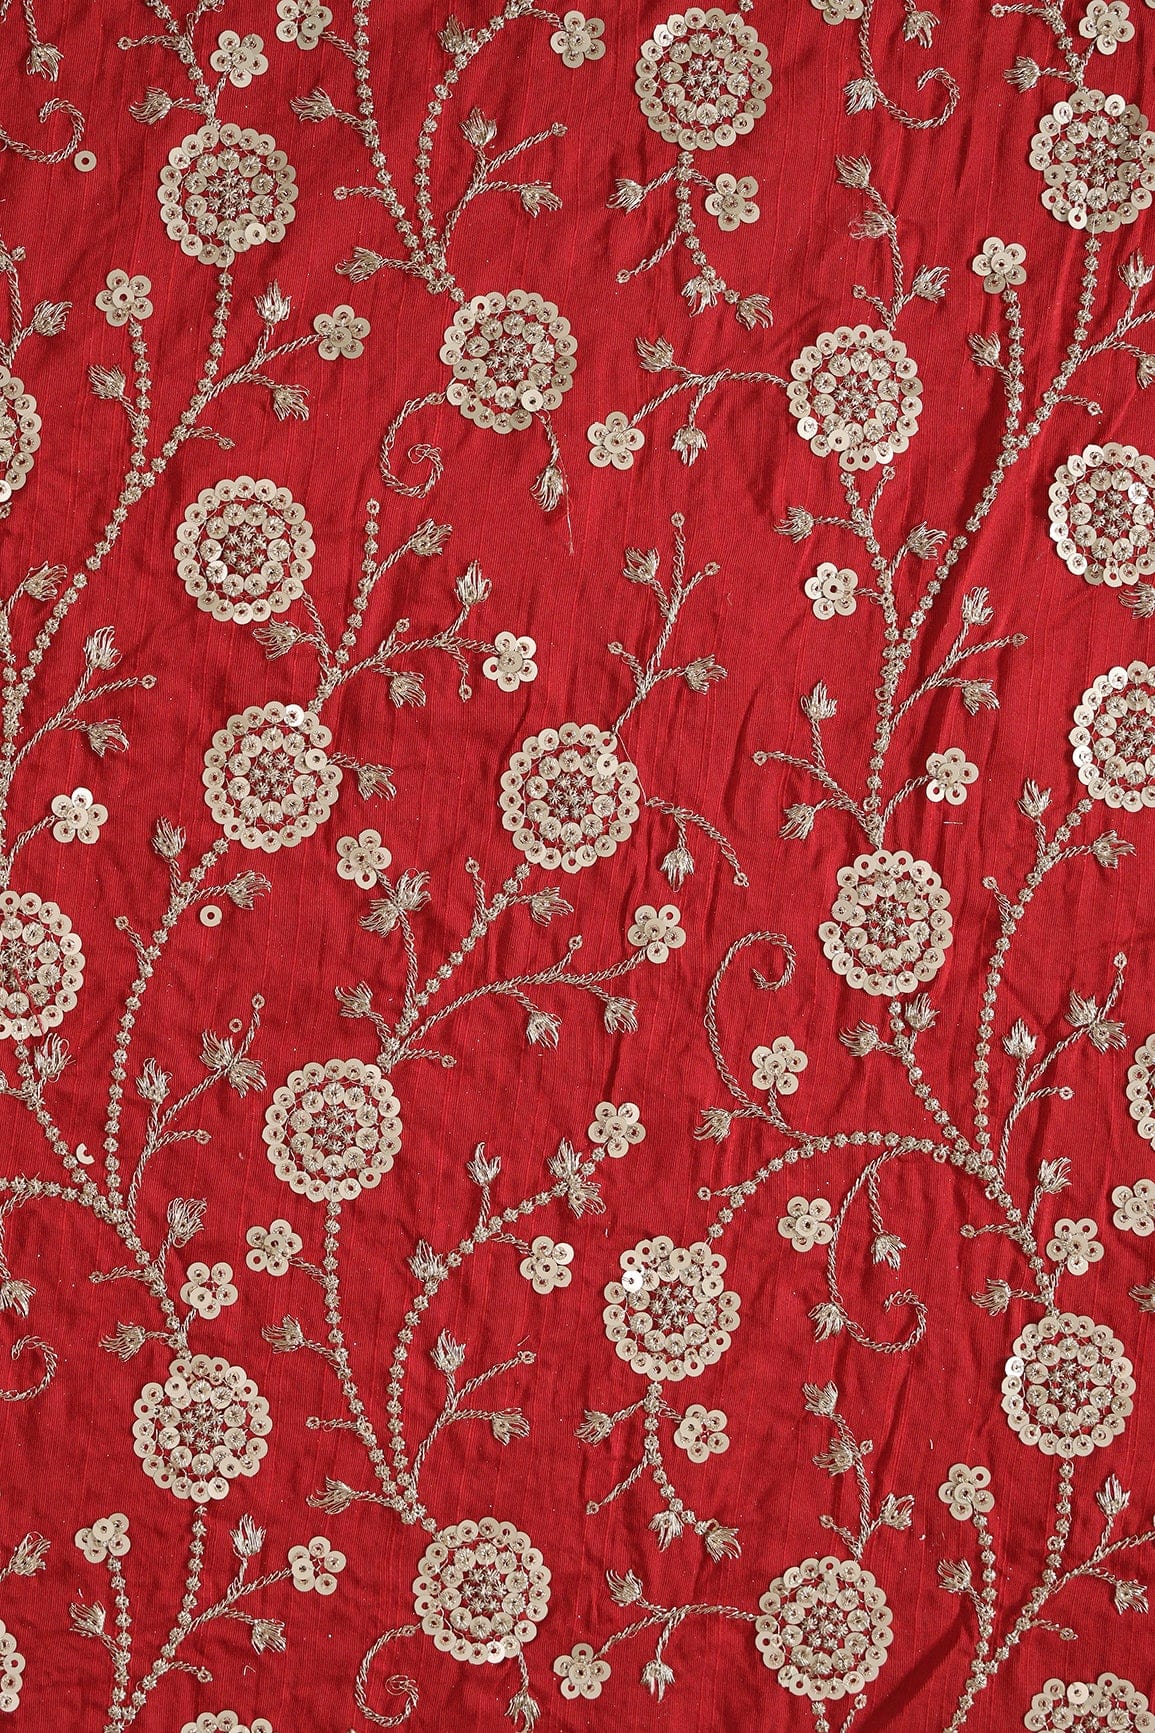 doeraa Embroidery Fabrics Gold Zari With Gold Sequins Beautiful Floral Embroidery Work On Red Raw Silk Fabric